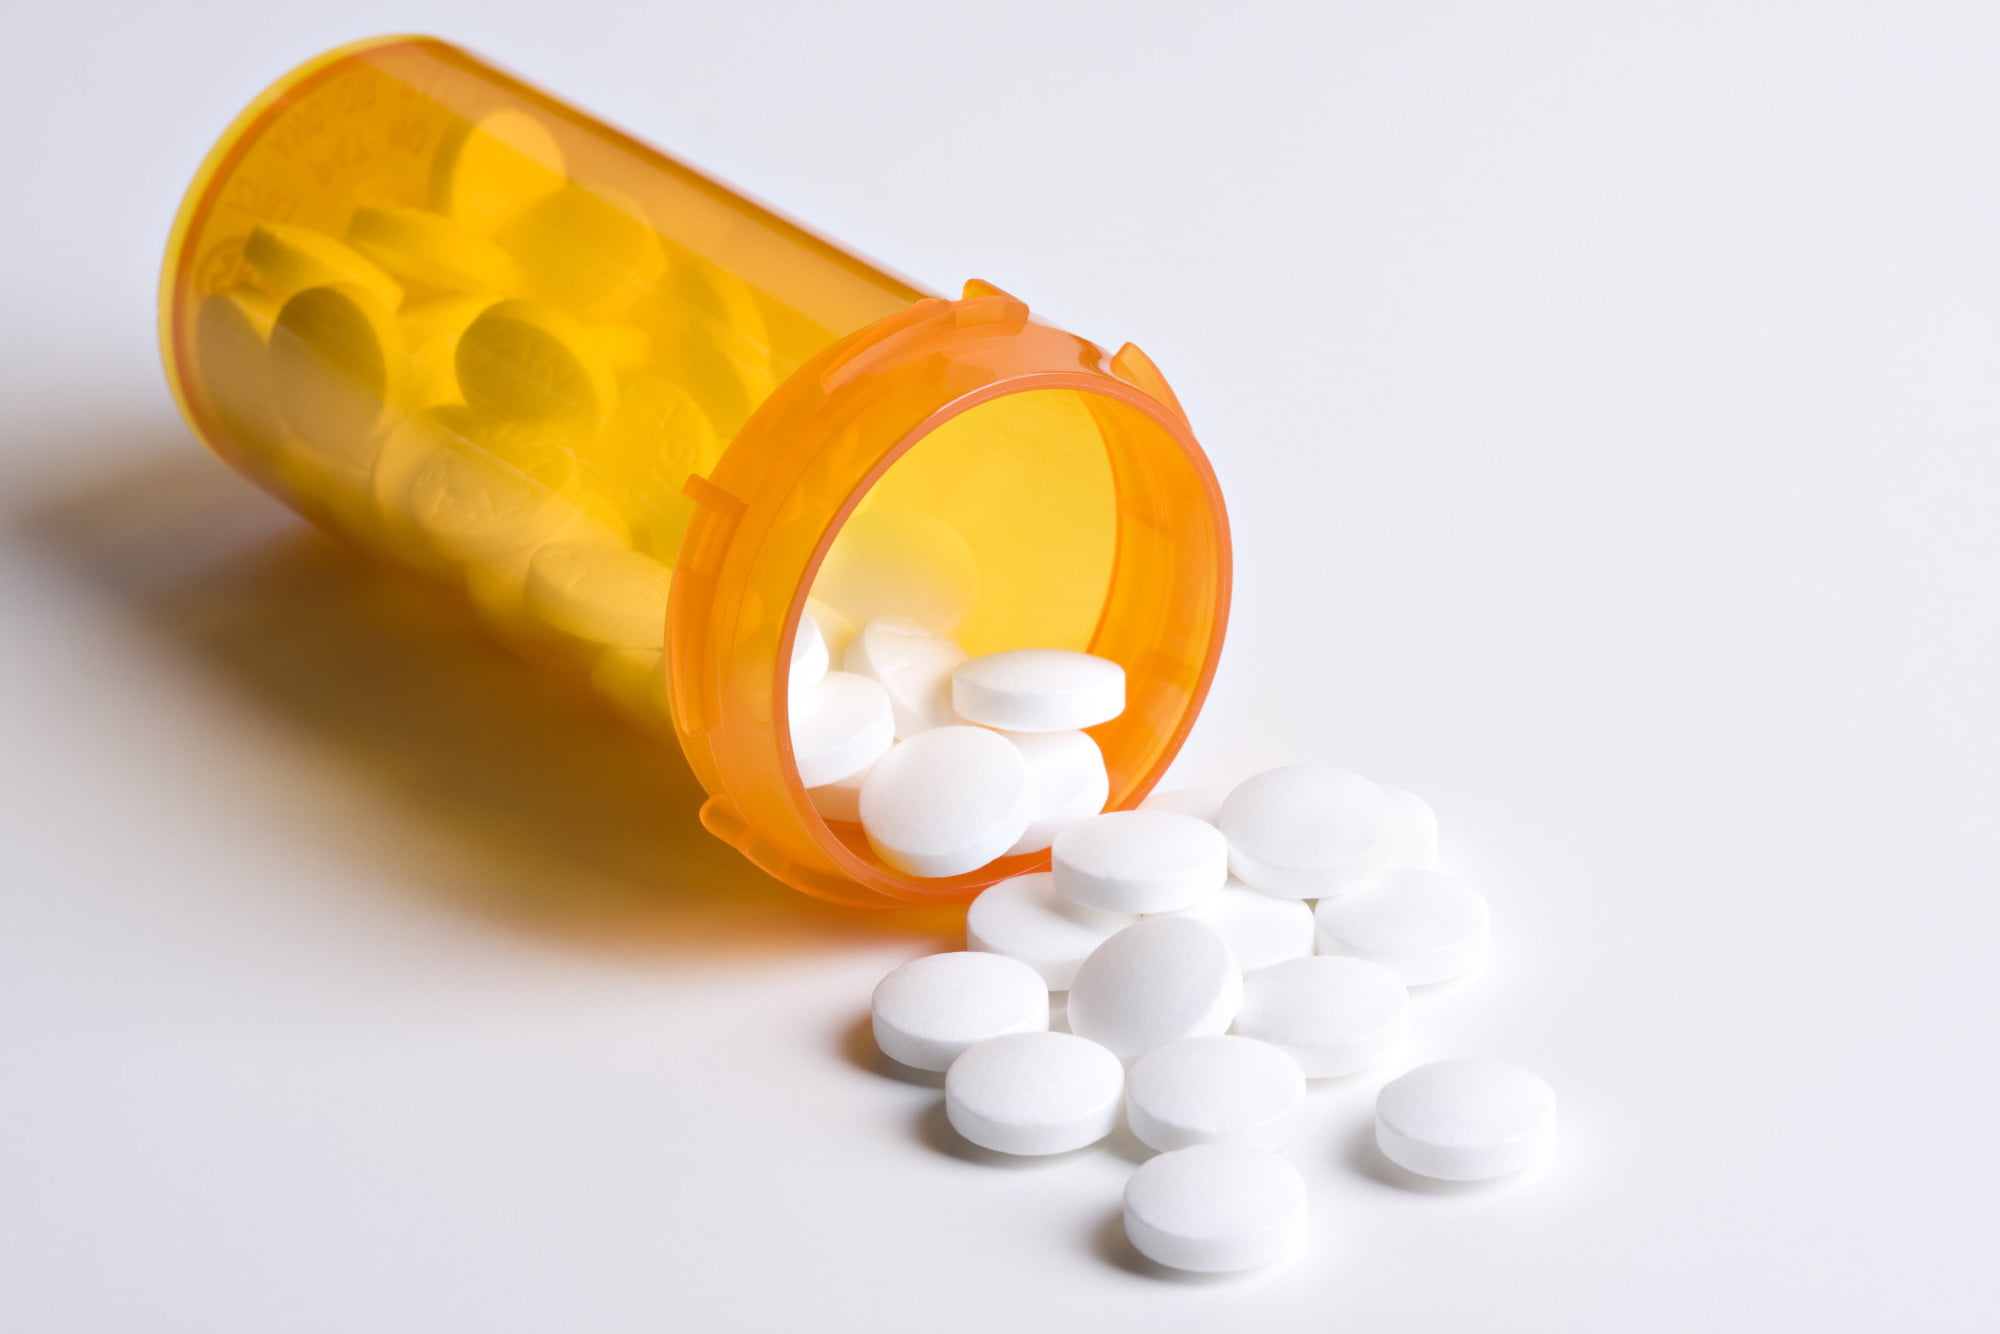 What is a controlled substance, and what should you know? Read this guide to learn about the different types, legal concerns, and safety risks.